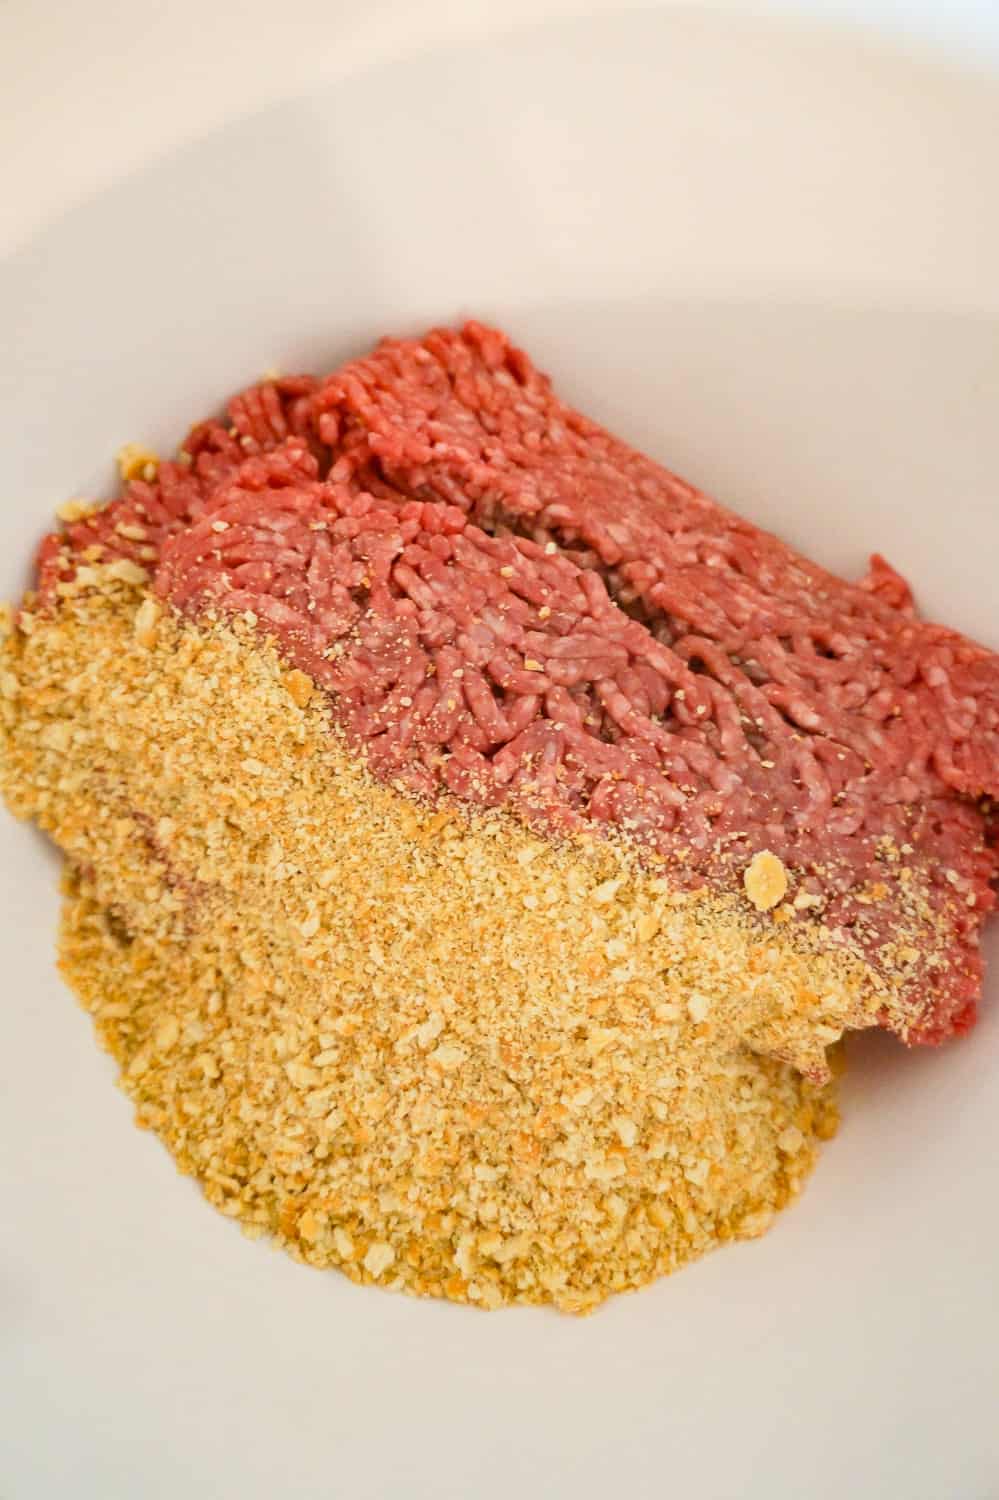 raw ground beef and Ritz cracker crumbs in a mixing bowl